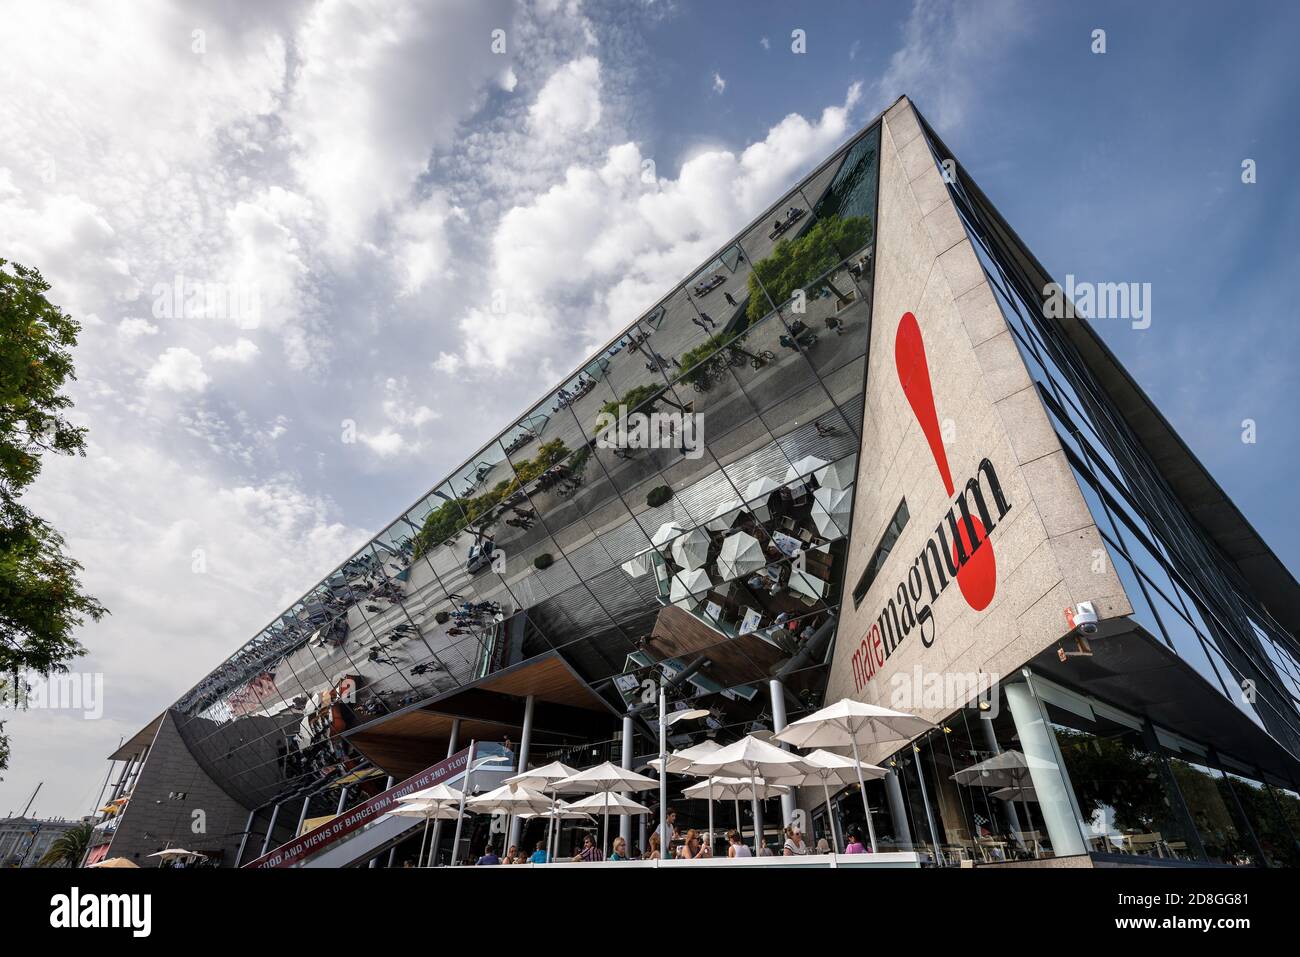 Maremagnum or Mare Magnum, large shopping mall, leisure center with shops and restaurants built at Port Vell area. Catalonia, Spain Stock Photo